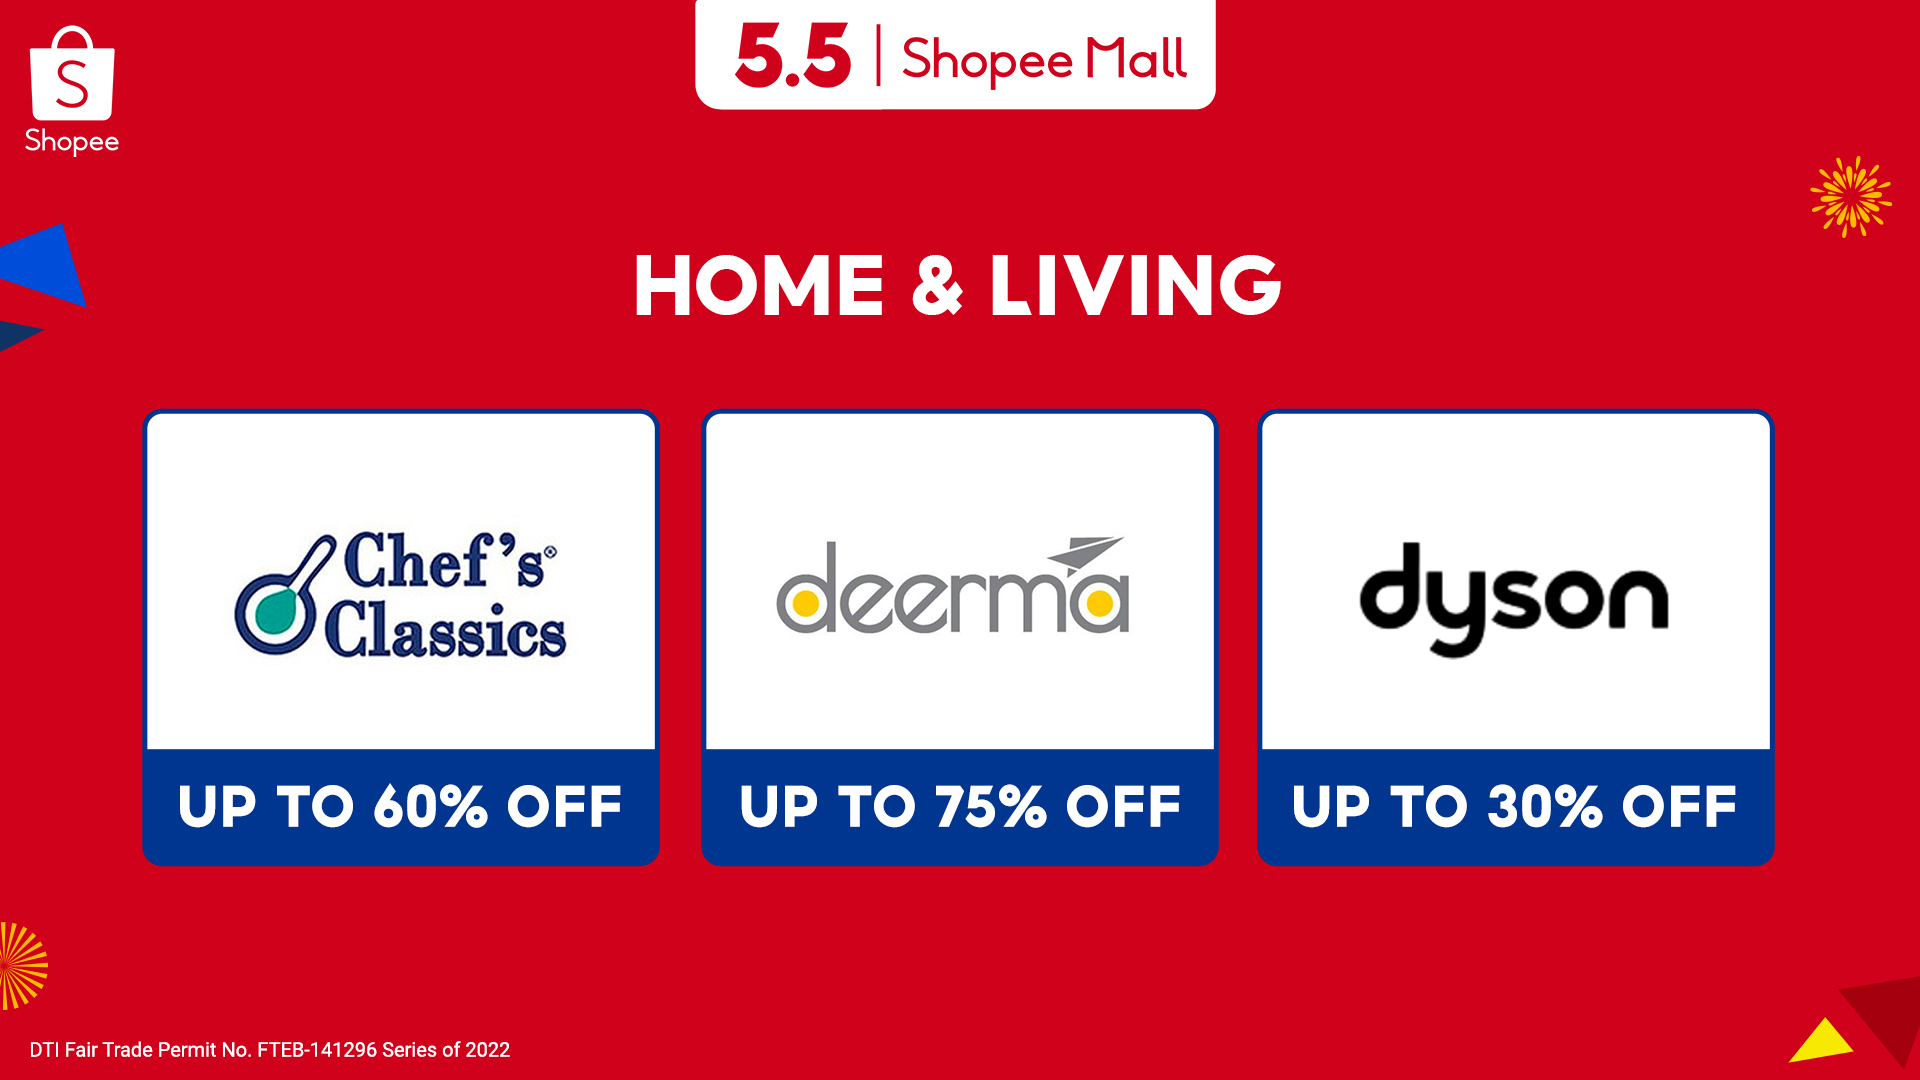 From 30% off on Dyson products to 56% off discounts at OPPO, here’s the ultimate guide to the most exciting brand deals that await at Shopee’s 5.5 Brands Festival!